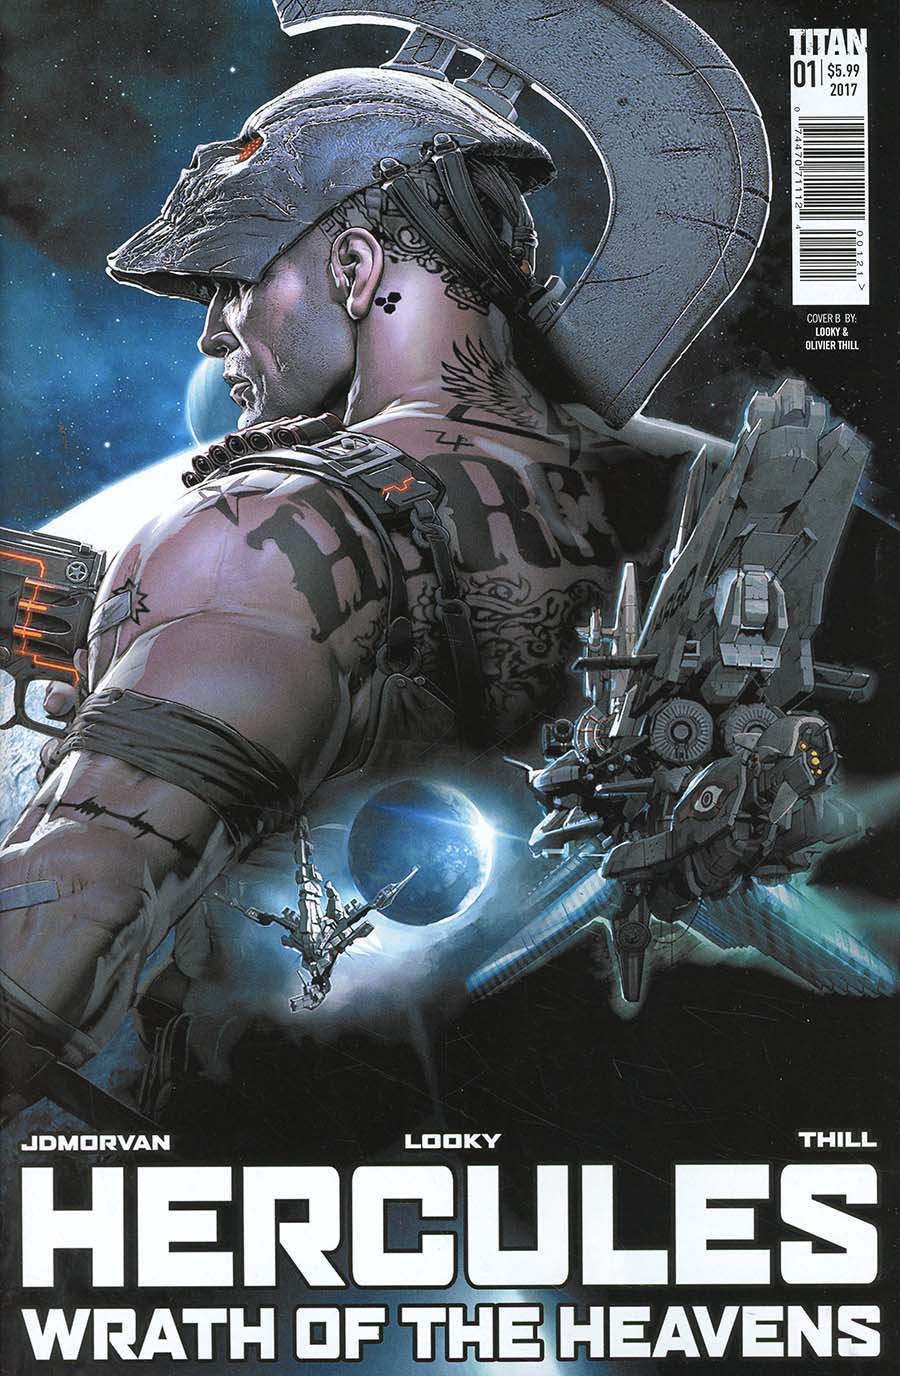 Hercules Wrath Of The Heavens #1 Cover B Variant Looky Cover